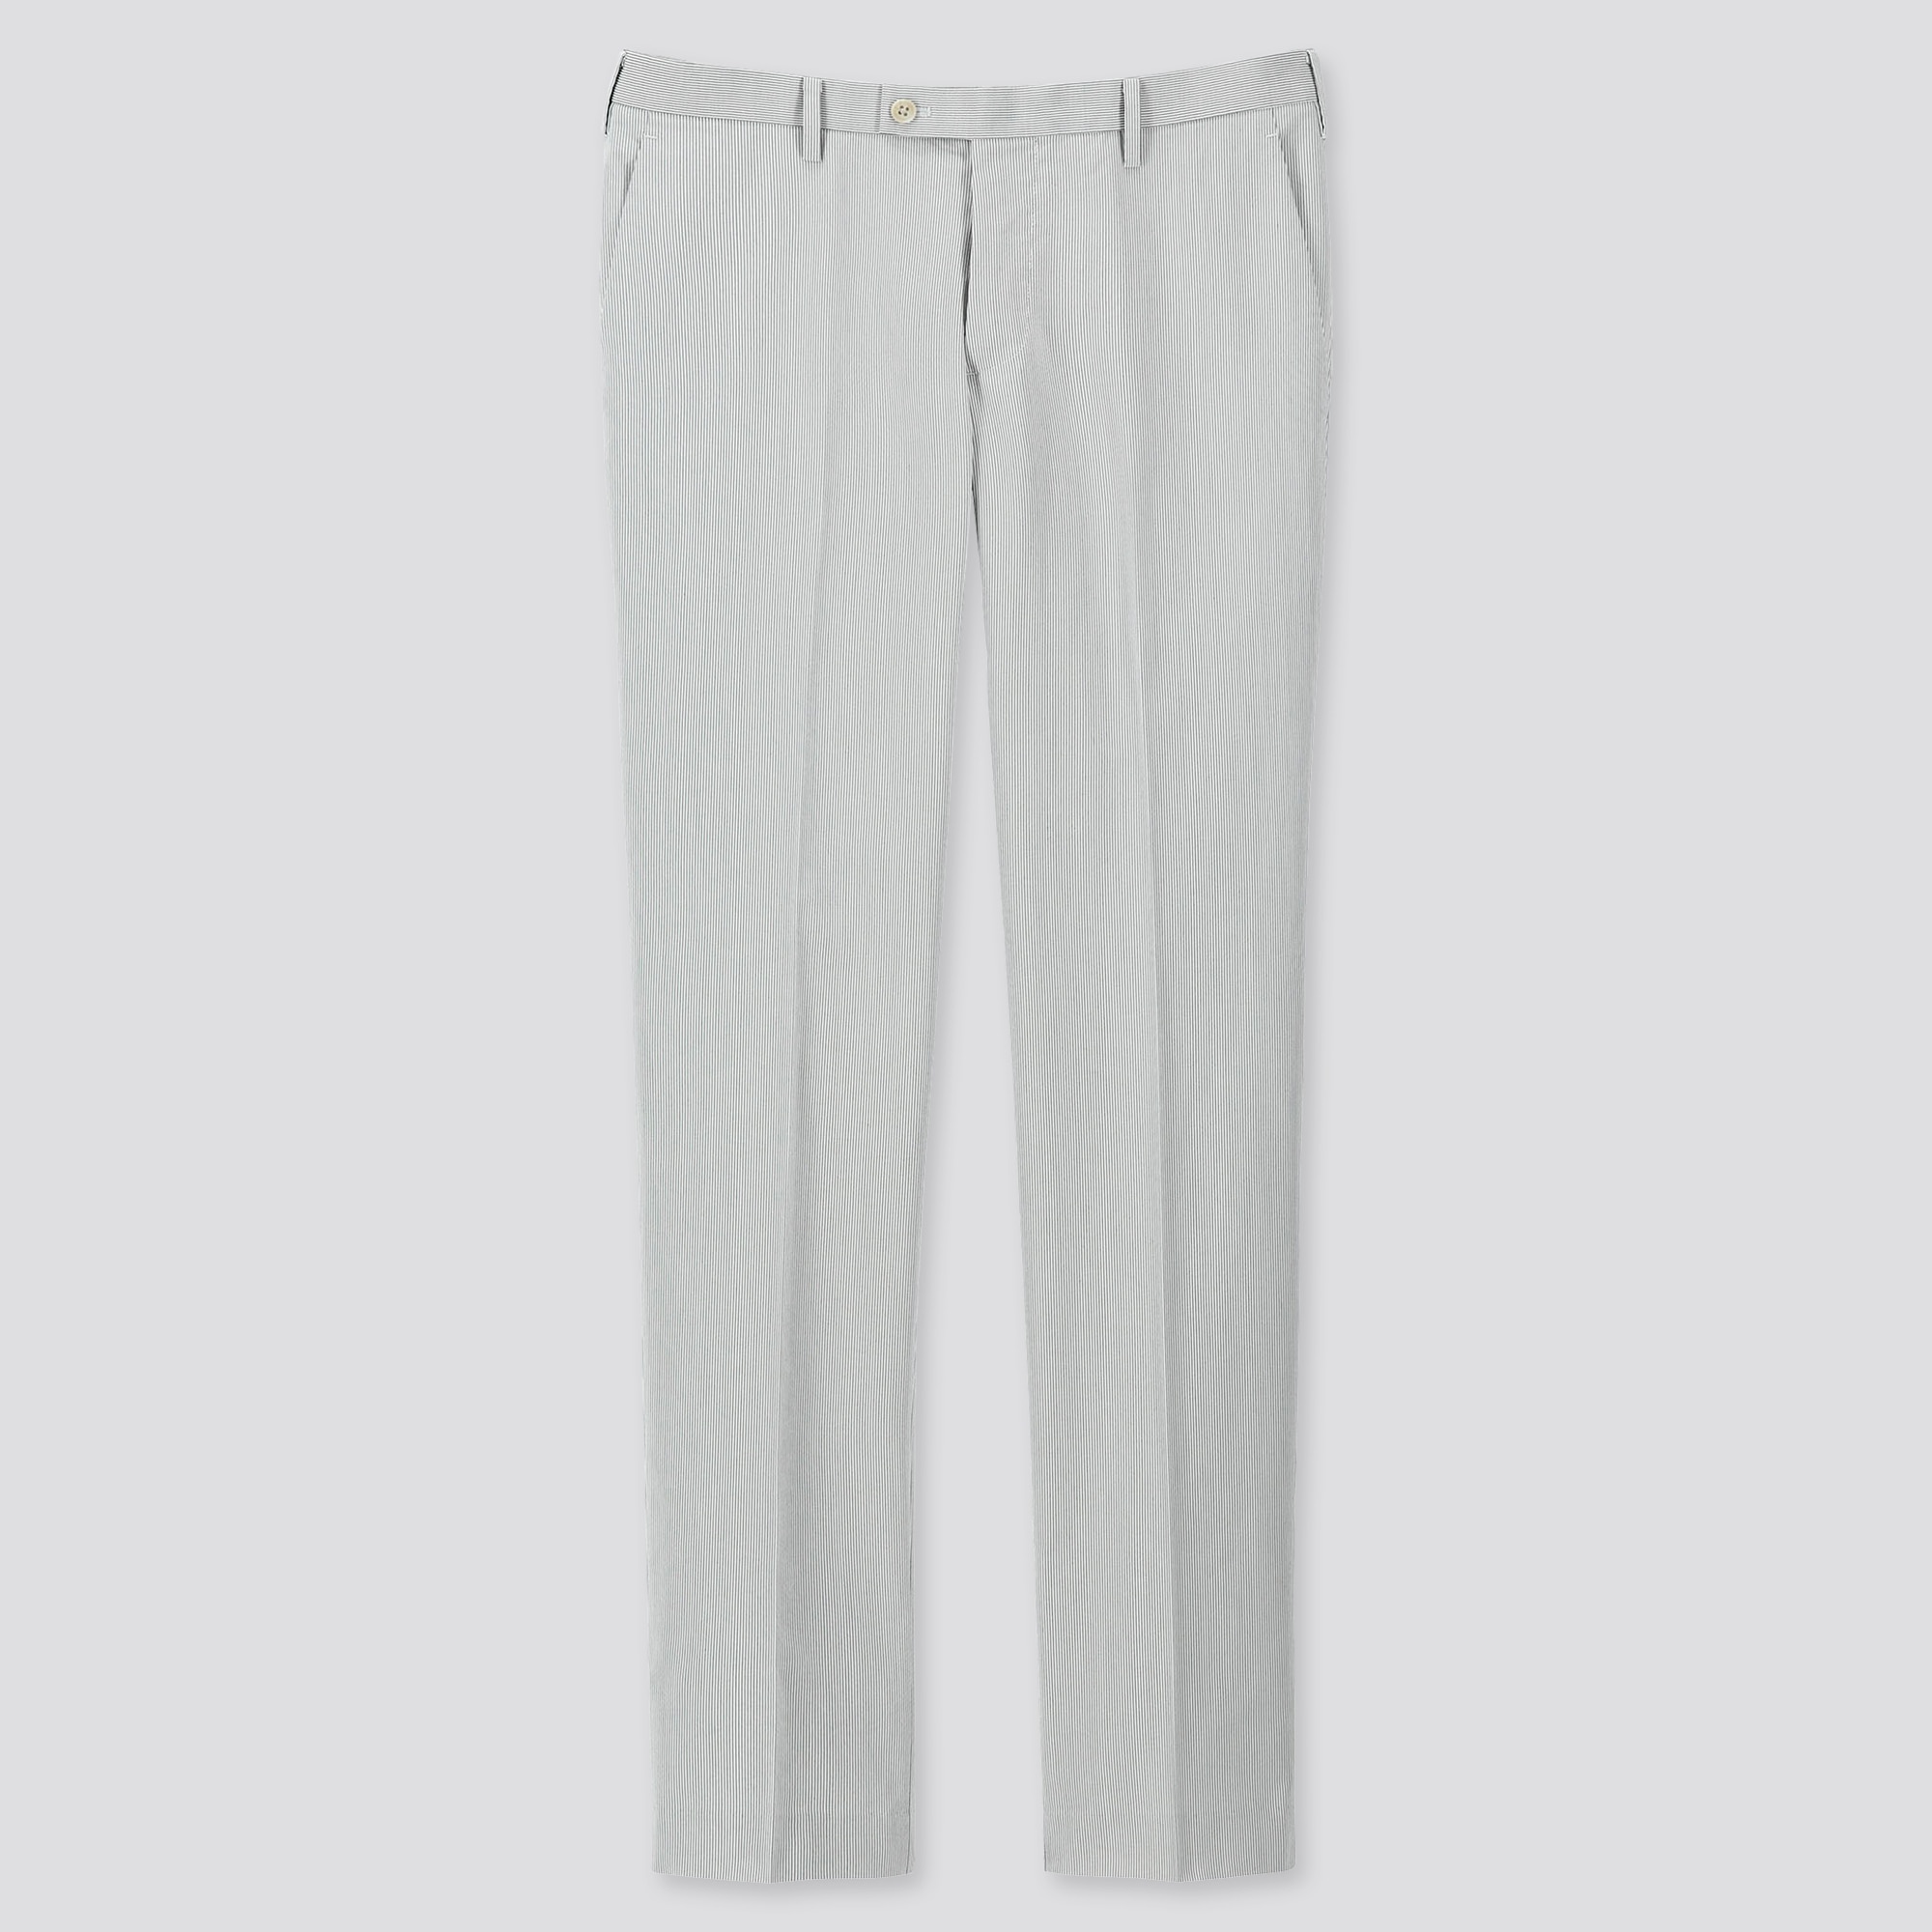 mens grey trousers with black stripe